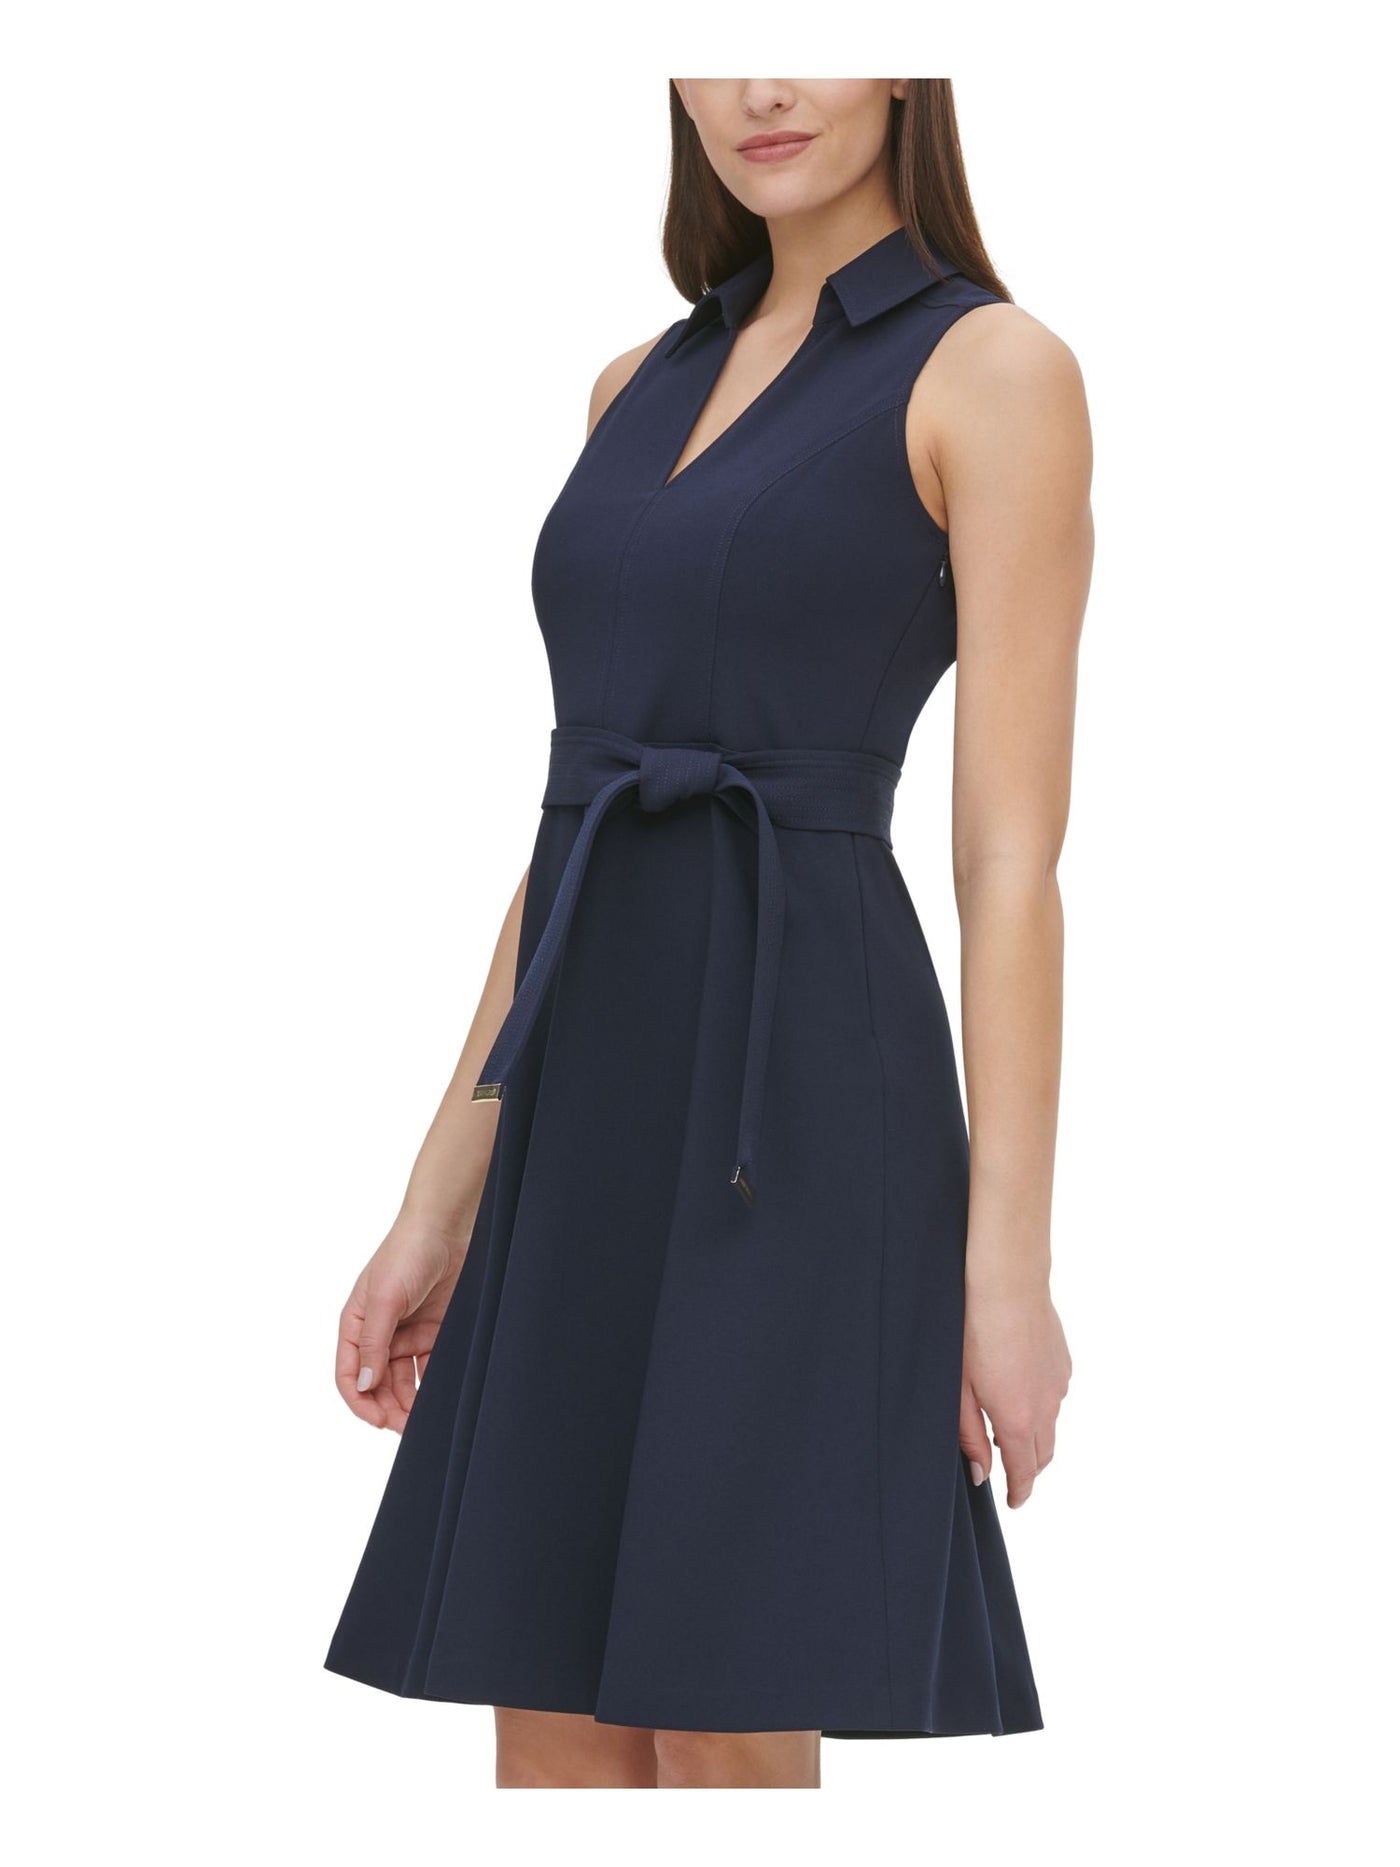 TOMMY HILFIGER Womens Navy Belted Sleeveless Point Collar Above The Knee Wear To Work Fit + Flare Dress 10